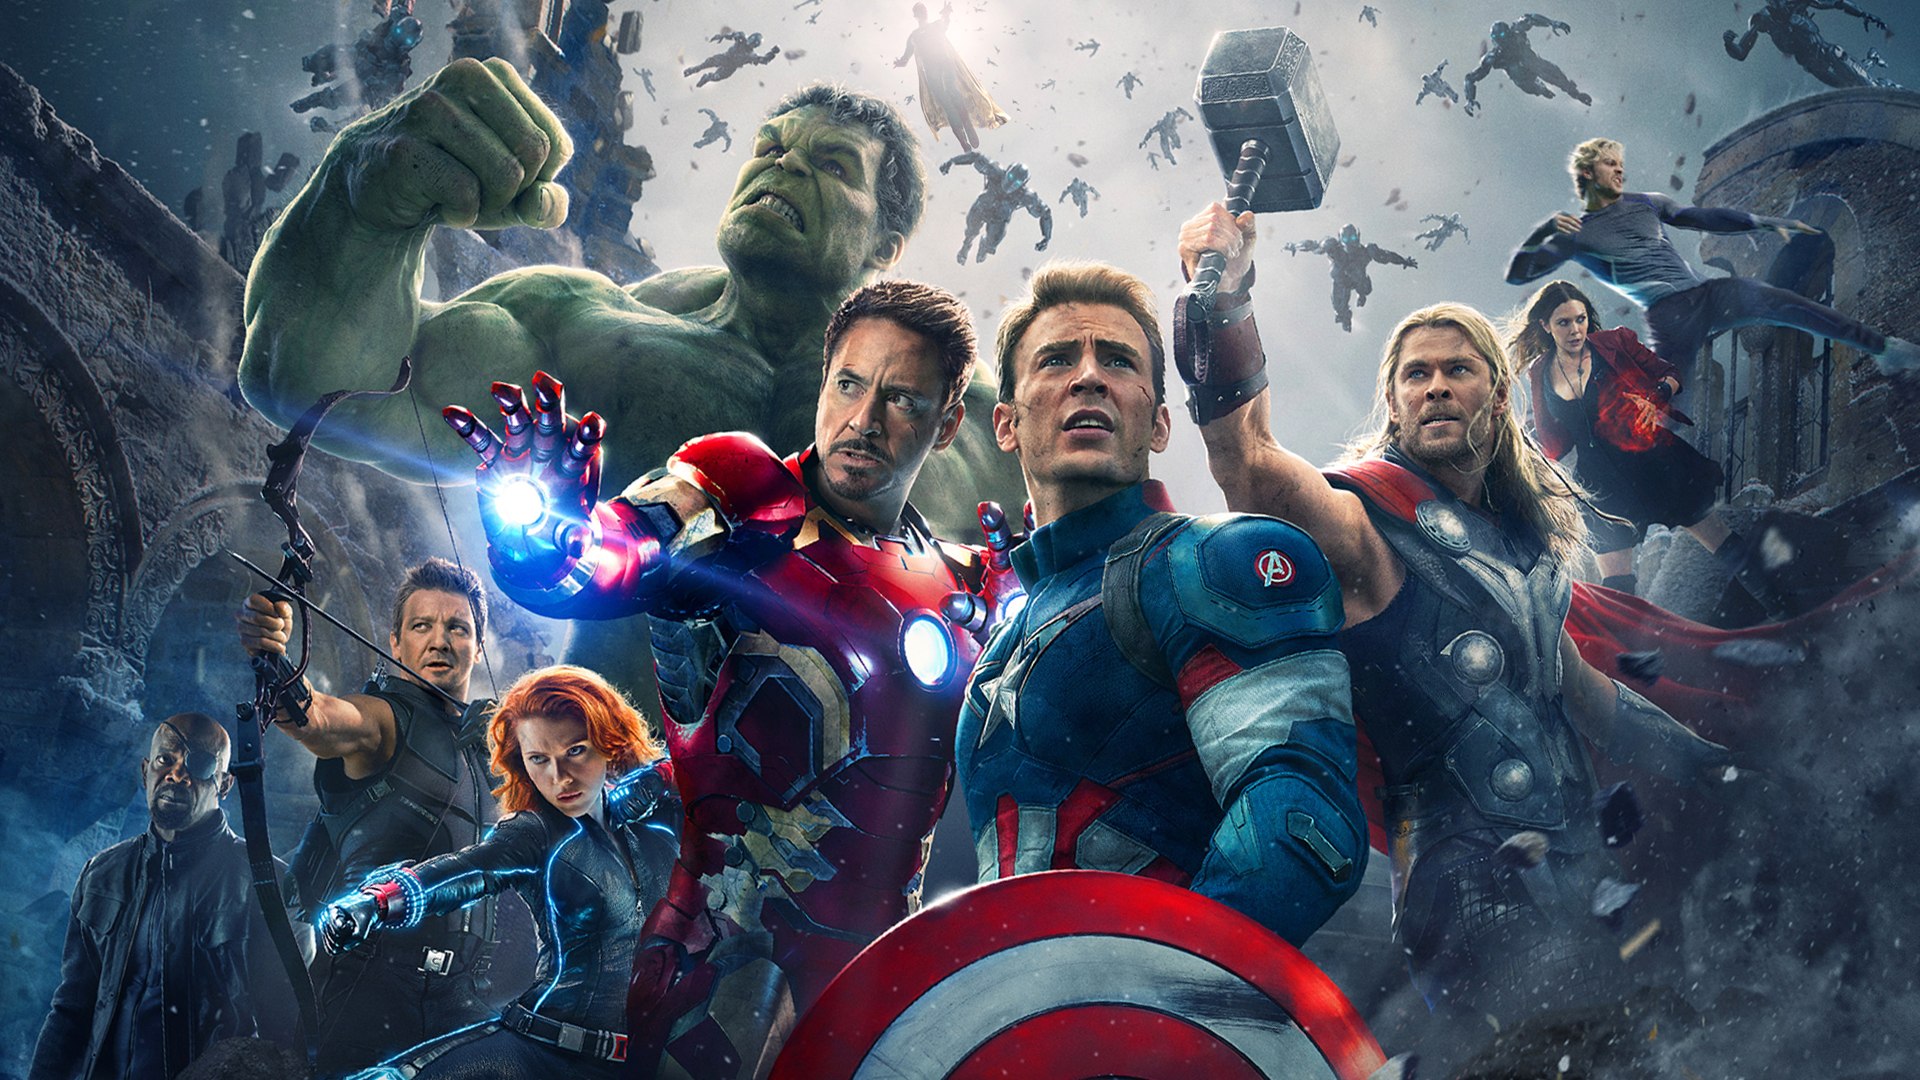 Avengers Age of Ultron Wallpaper 1920x1080 by sachso74 on